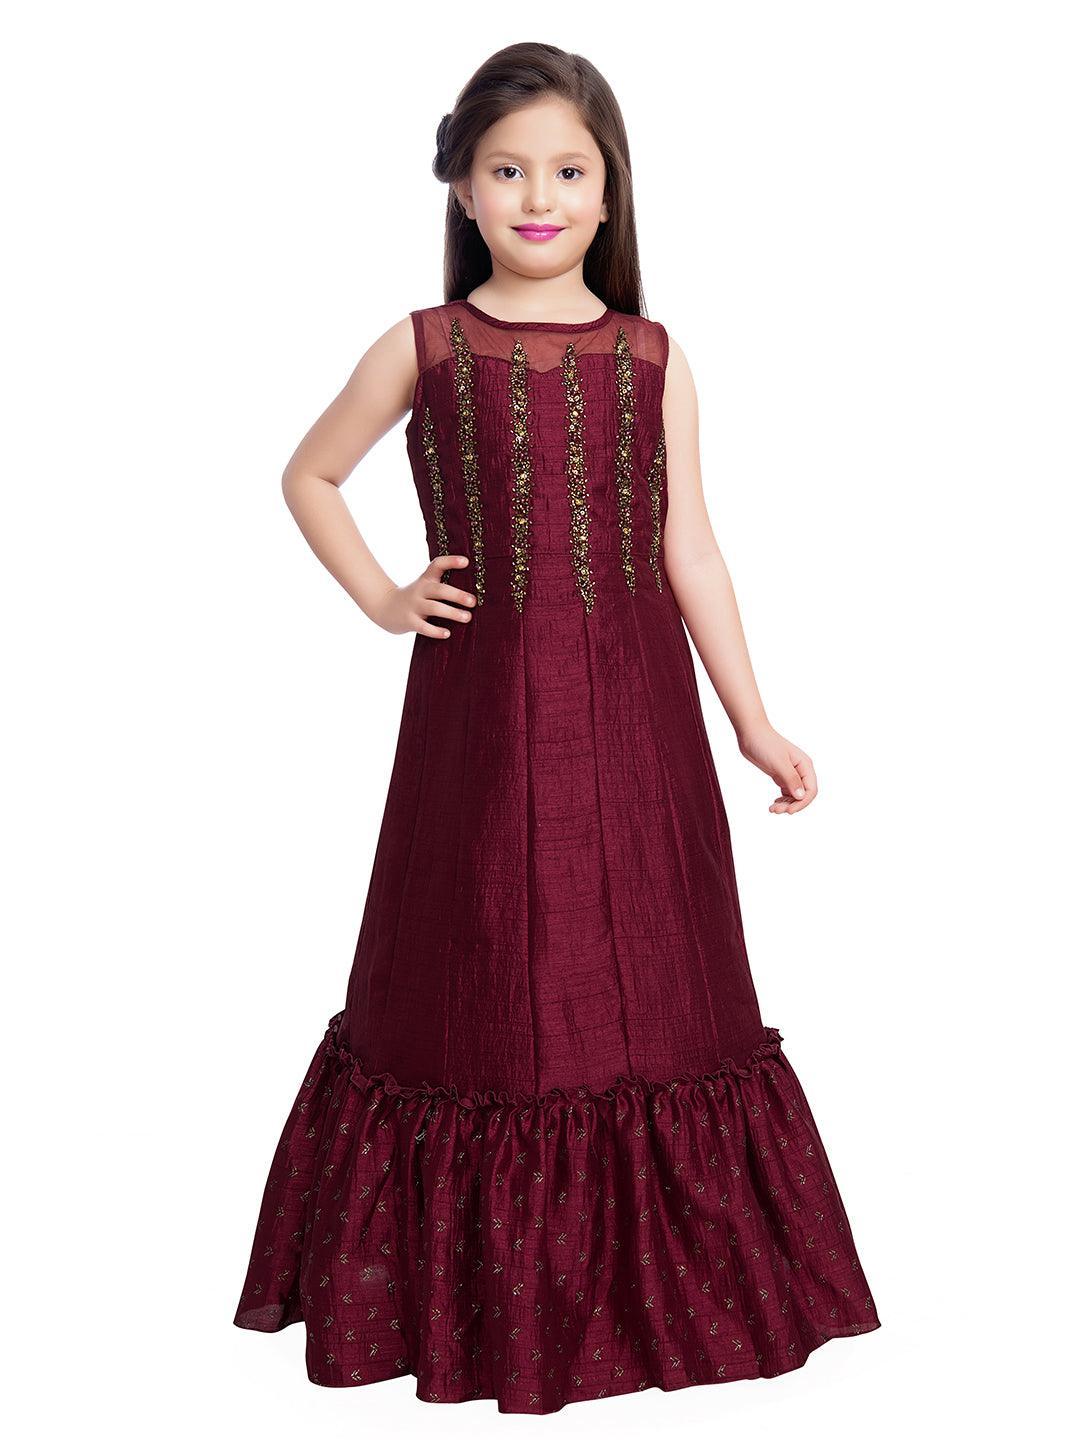 Latest Betty Printed & Floral Dresses arrivals - Girls - 2 products |  FASHIOLA INDIA